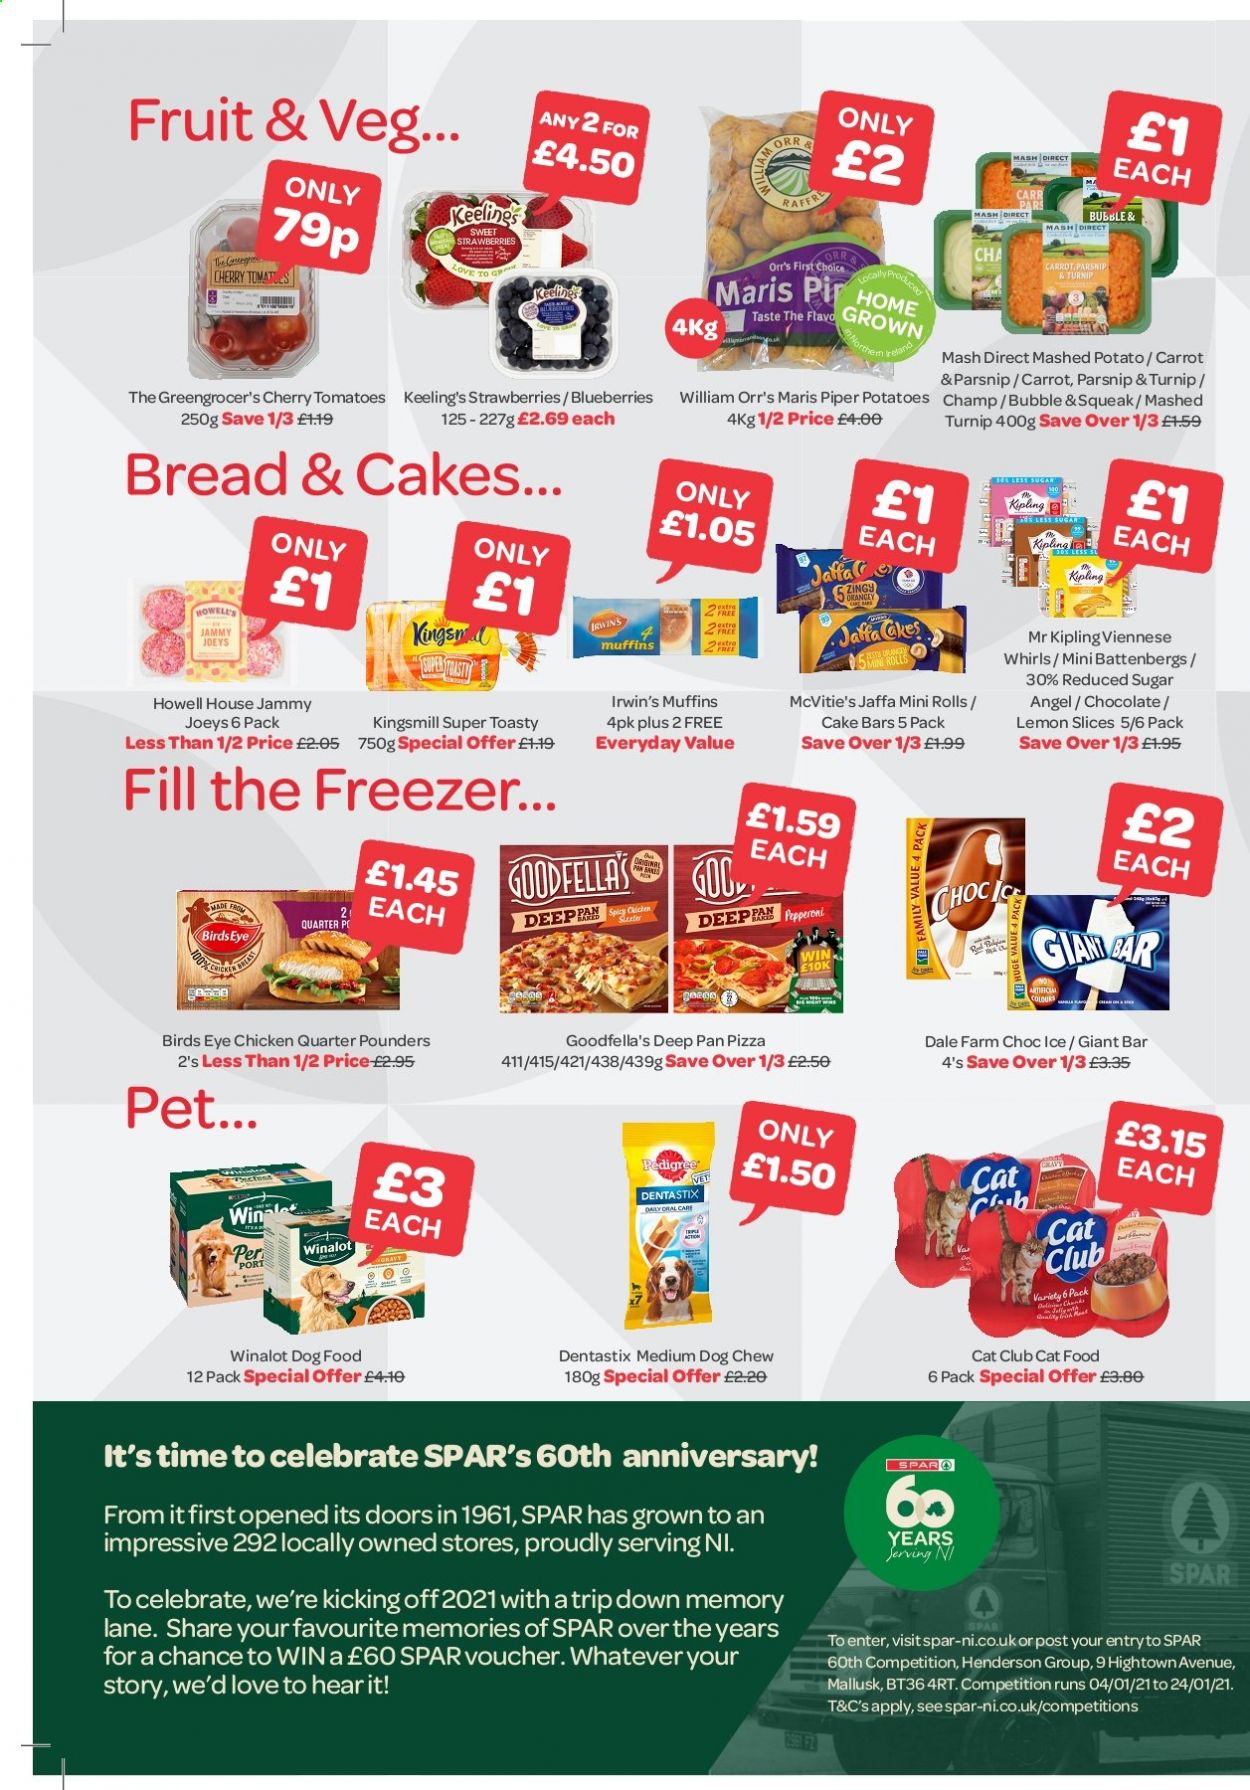 thumbnail - SPAR offer  - 04/01/2021 - 24/01/2021 - Sales products - tomatoes, potatoes, parsnips, blueberries, strawberries, bread, muffin, cake, pizza, Bird's Eye, chocolate, pan, animal food, cat food, dog food, Dentastix, Pedigree, Winalot. Page 5.